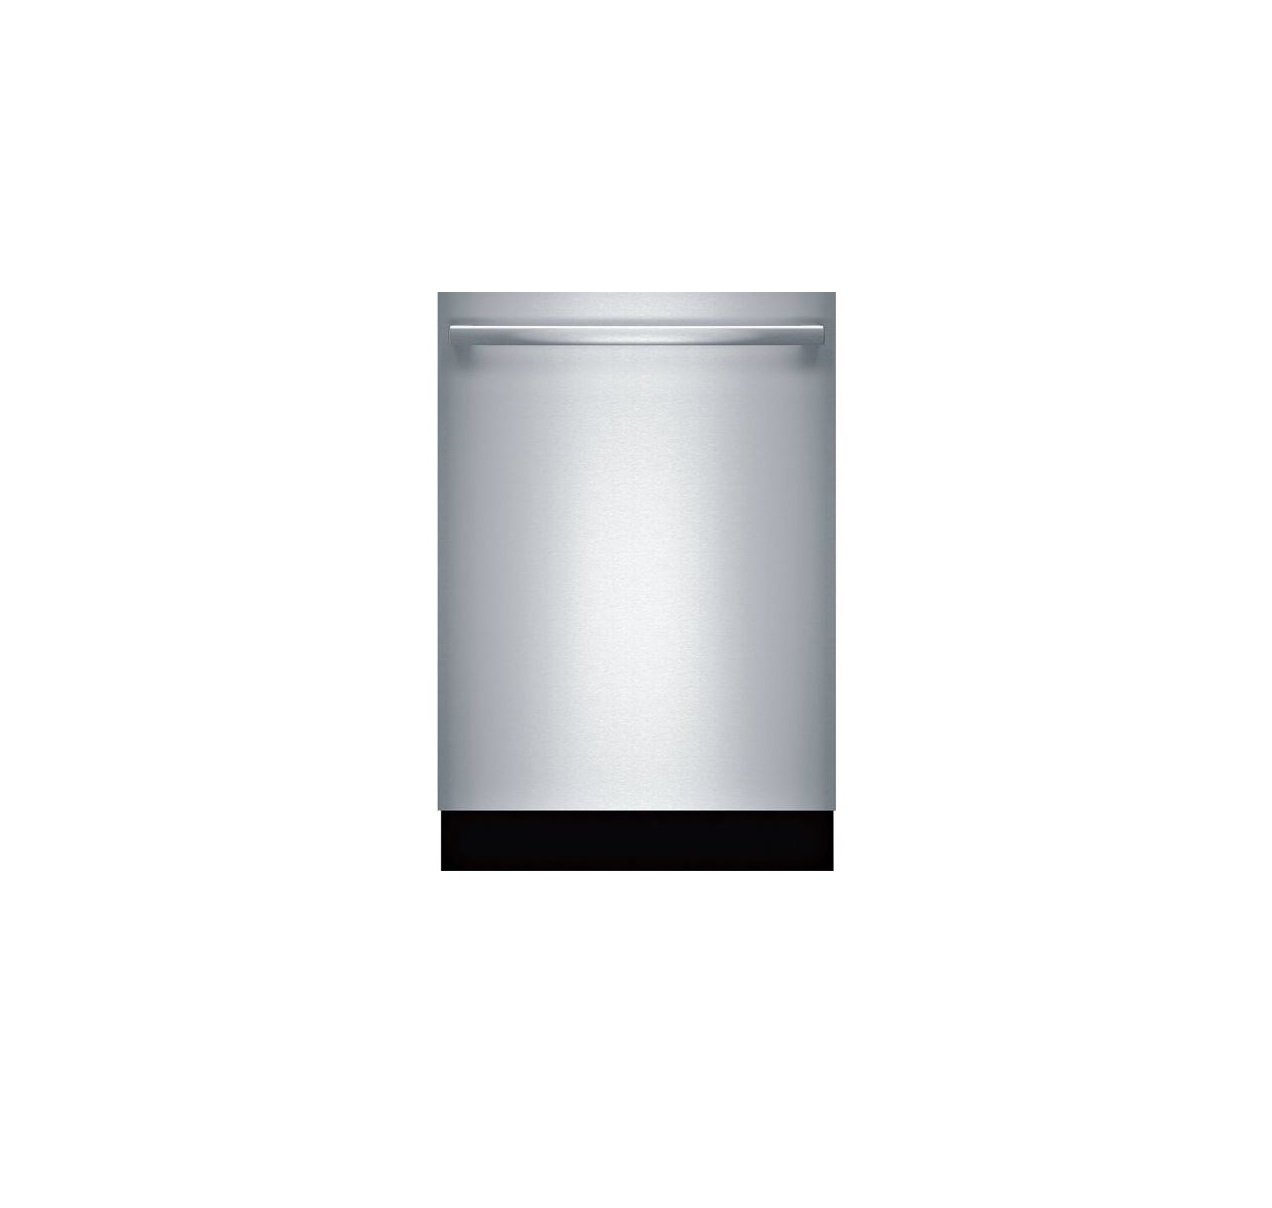 Bosch SHX878ZD5N 800 Series Dishwasher 24'' Stainless steel User Manual - feature image